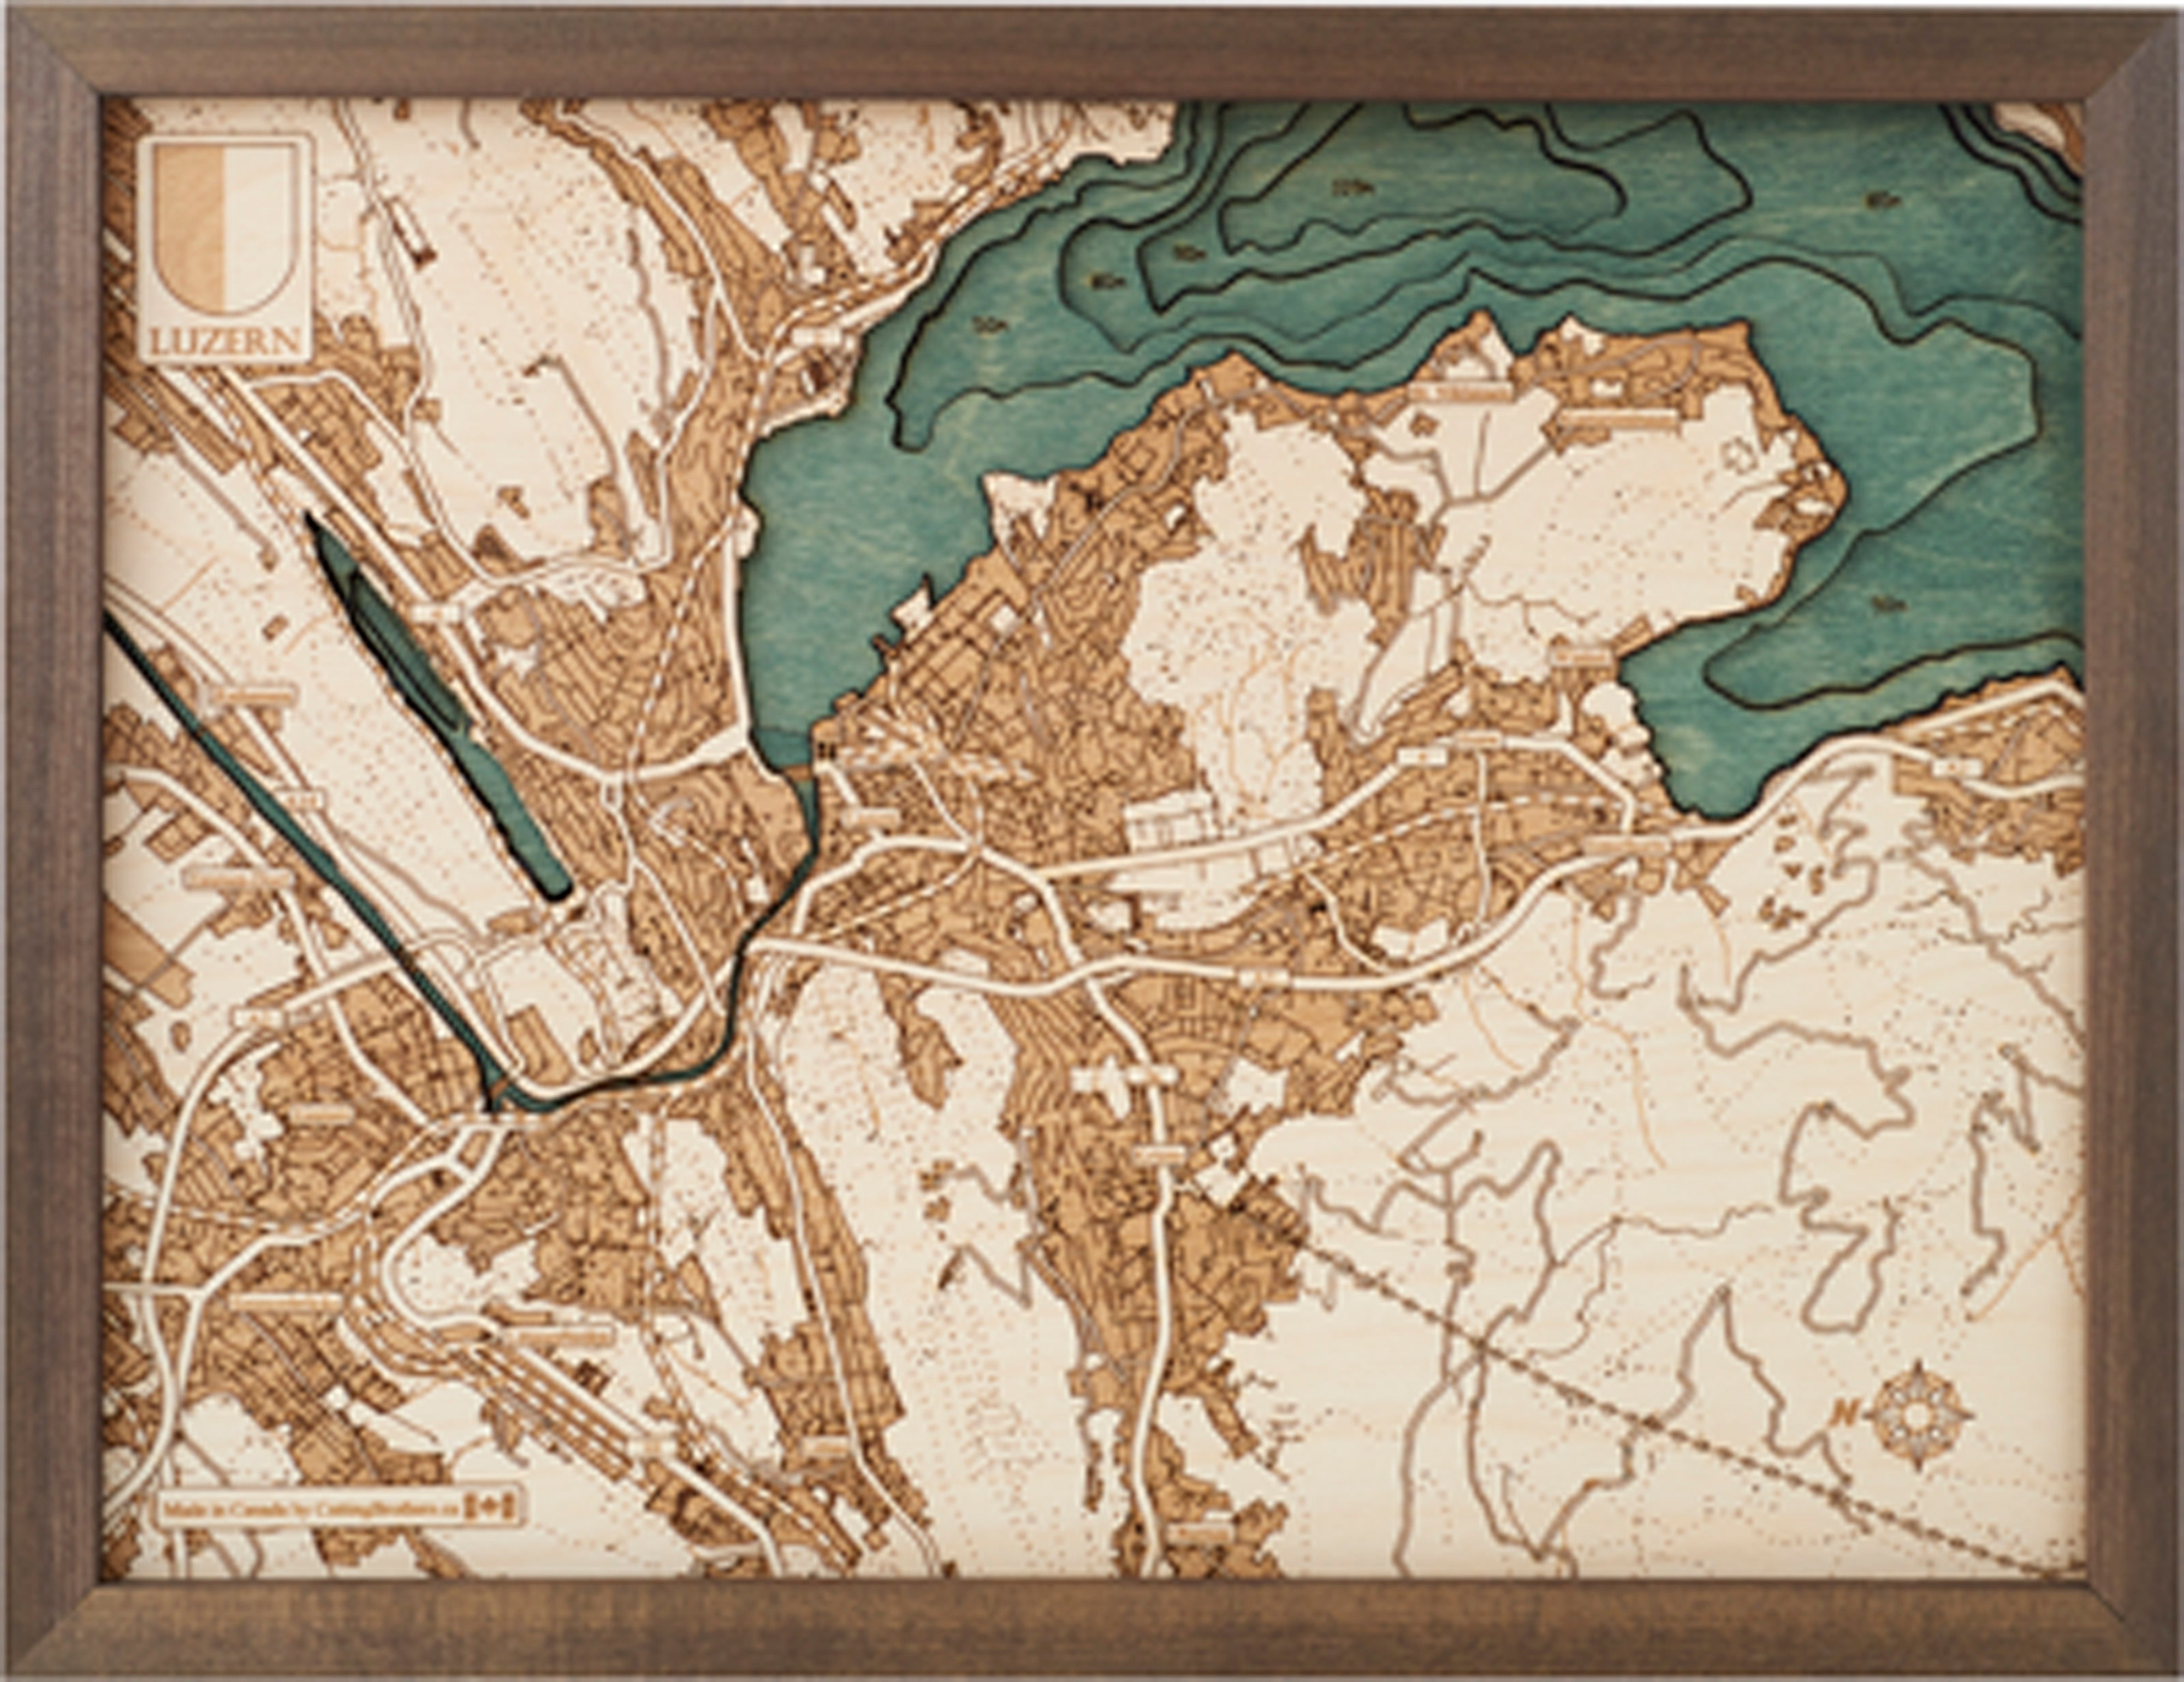 LUCERNE 3D wooden wall map - version S